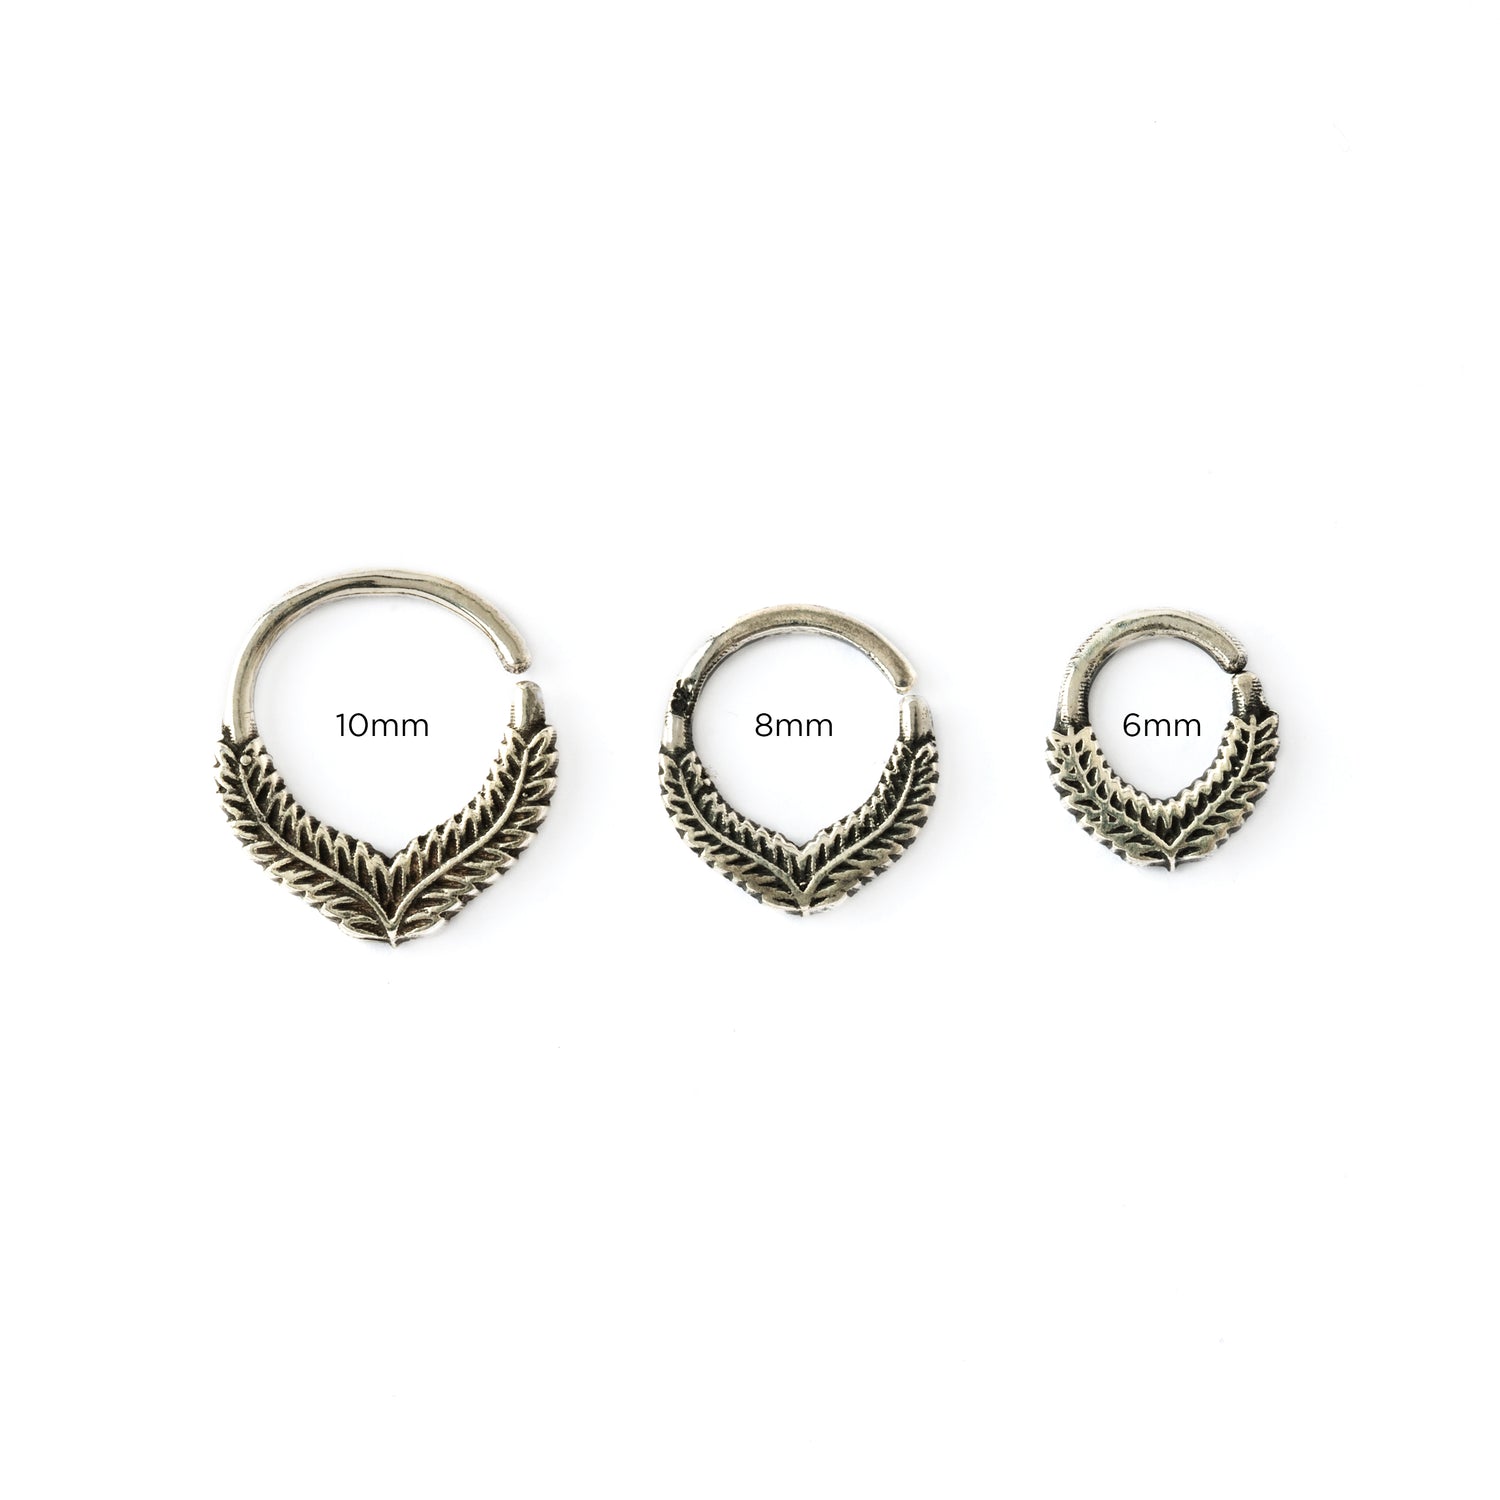 6mm, 8mm,10mm Fern silver septum rings frontal view